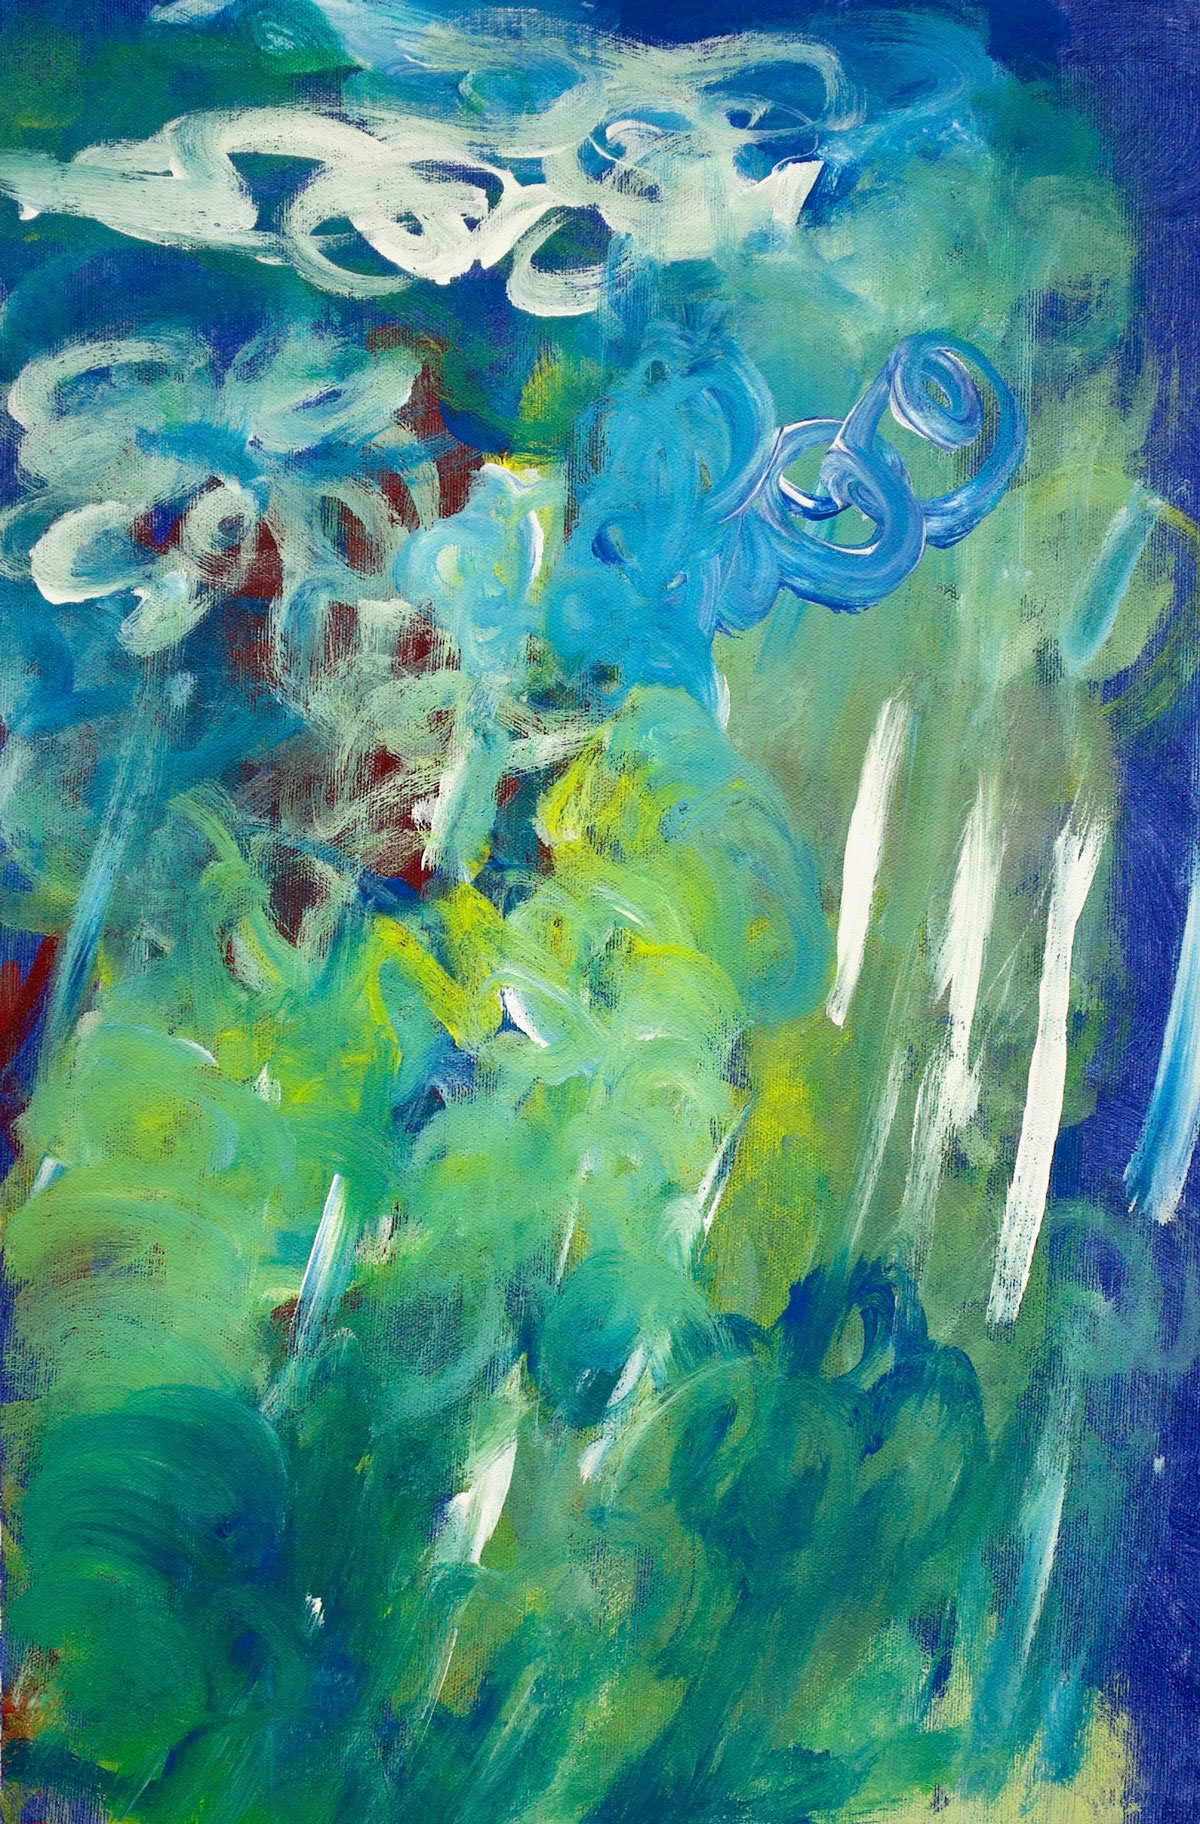 Painting: Shades of blue, green, and white swirl together to create a representation of misty rain.